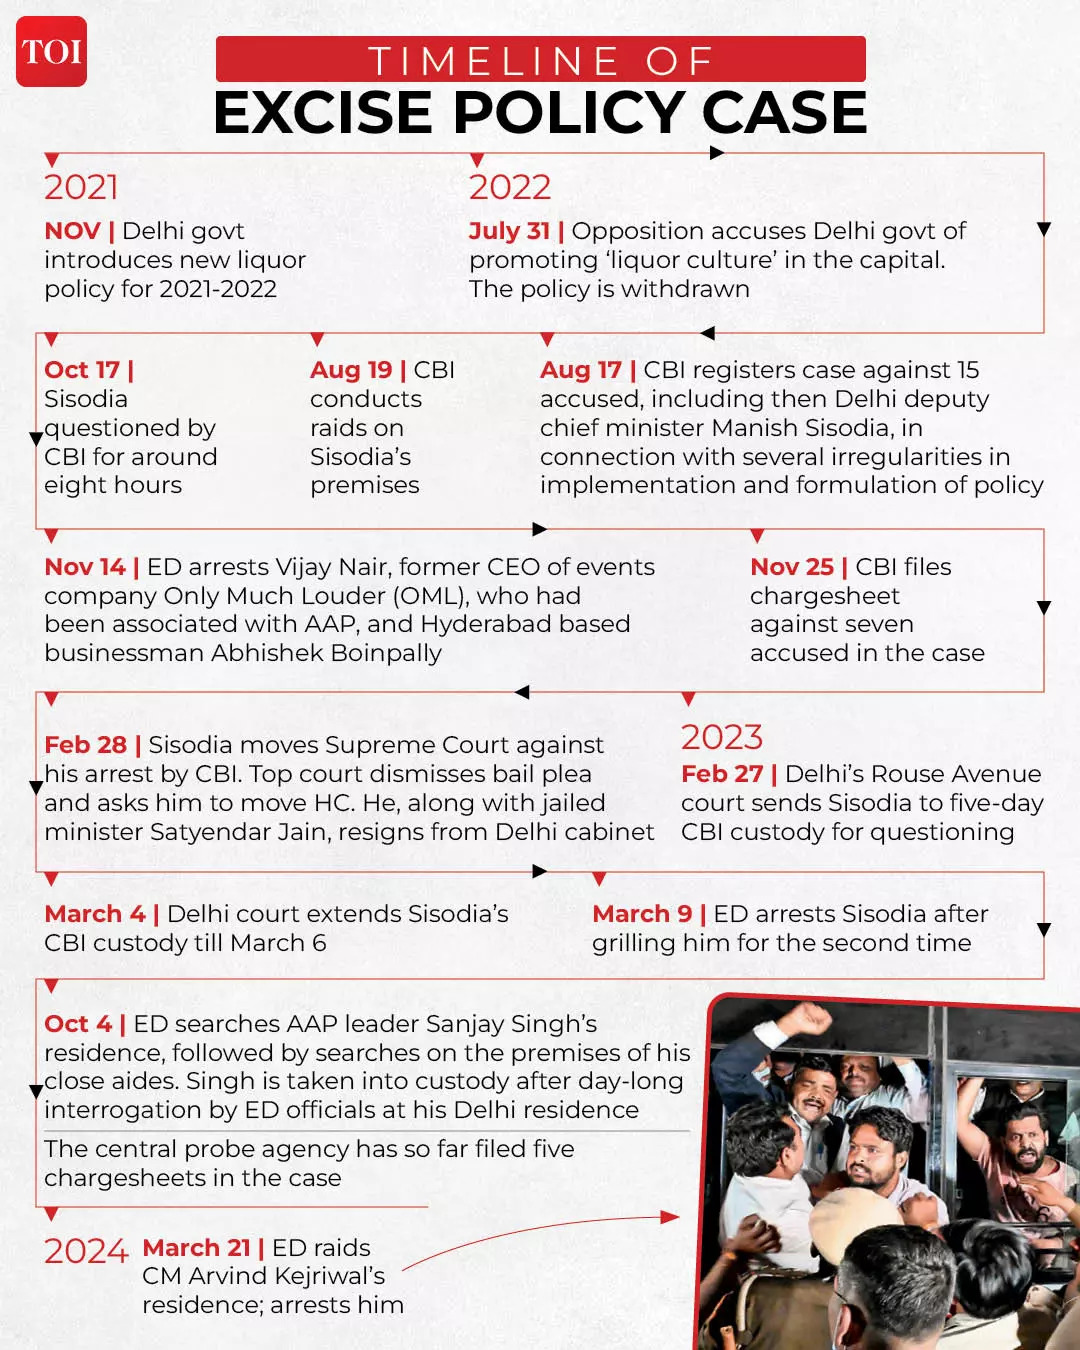 TIMELINE OF EXCISE POLICY CASE